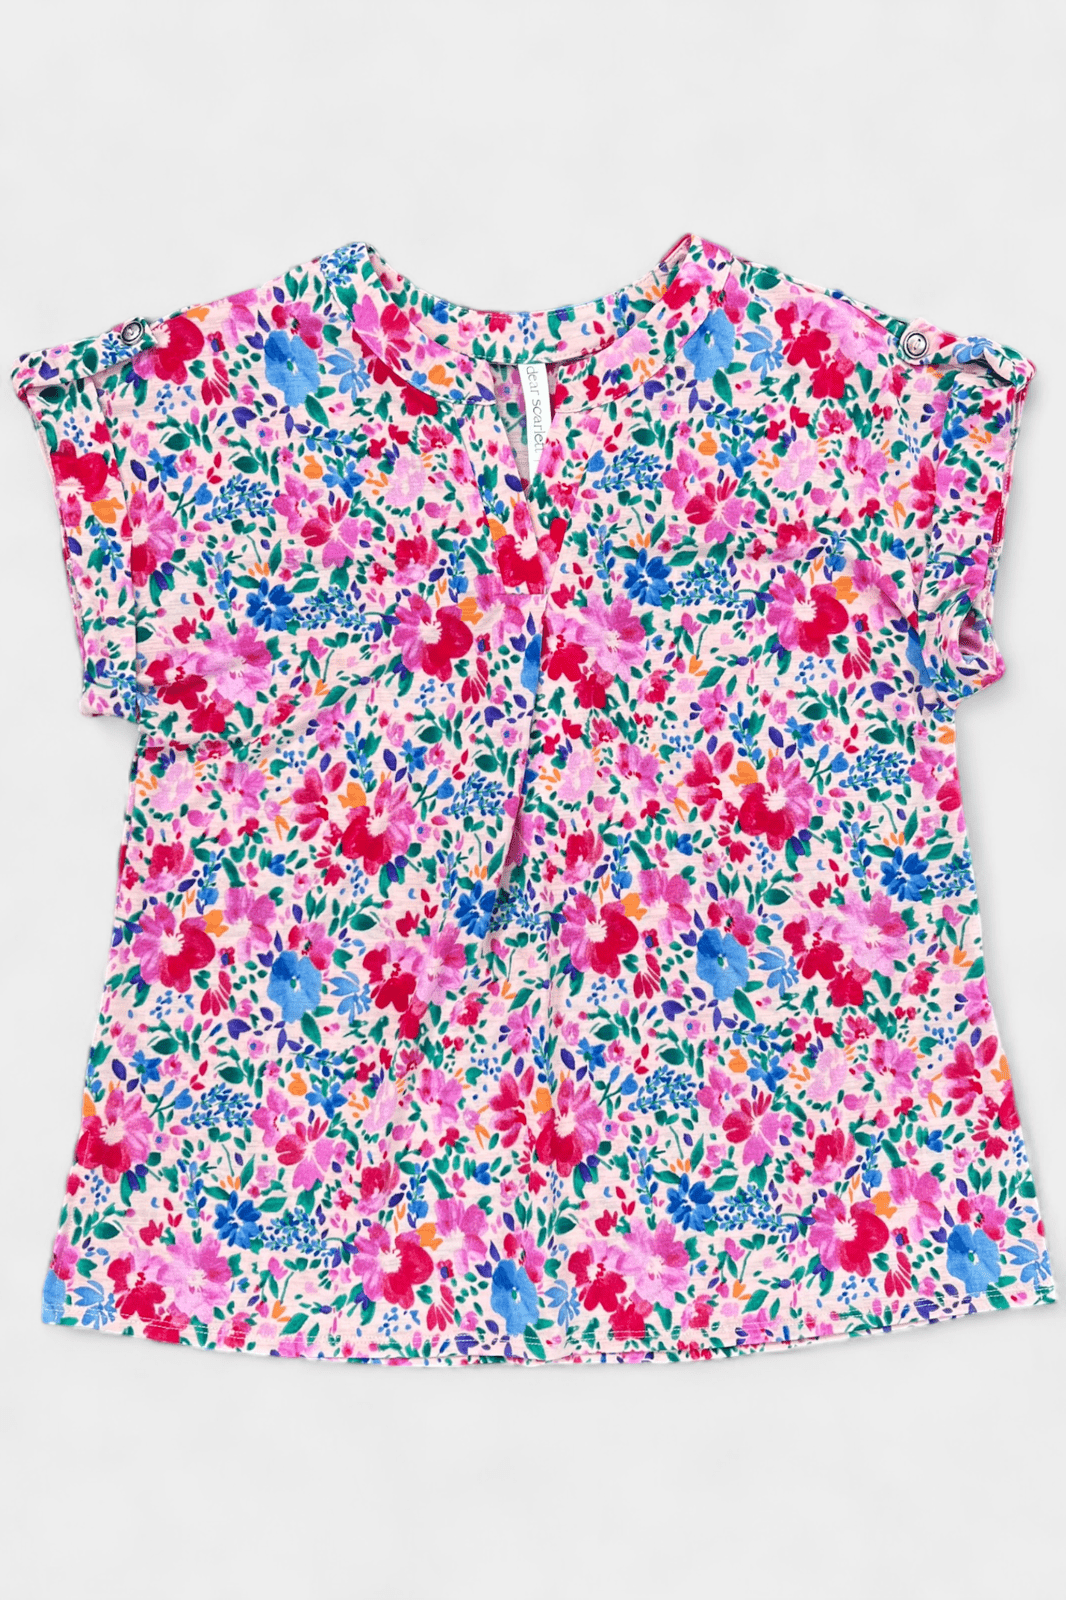 Magenta Multi Floral Lizzy Short Sleeve Top